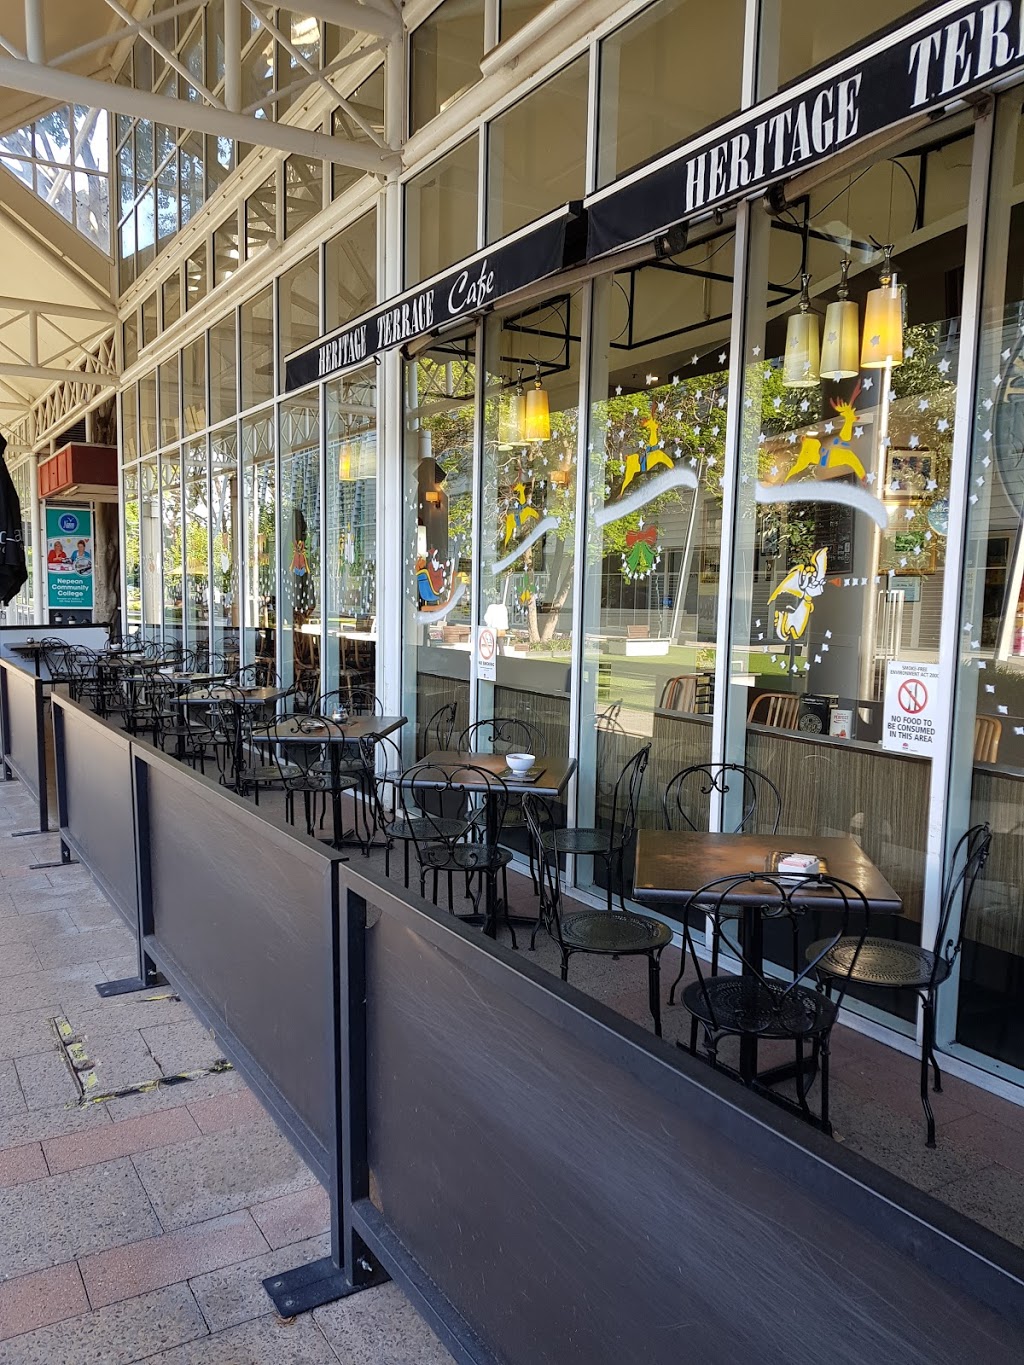 The Heritage Terrace Cafe | cafe | 585 High St, Penrith NSW 2750, Australia | 0247218142 OR +61 2 4721 8142